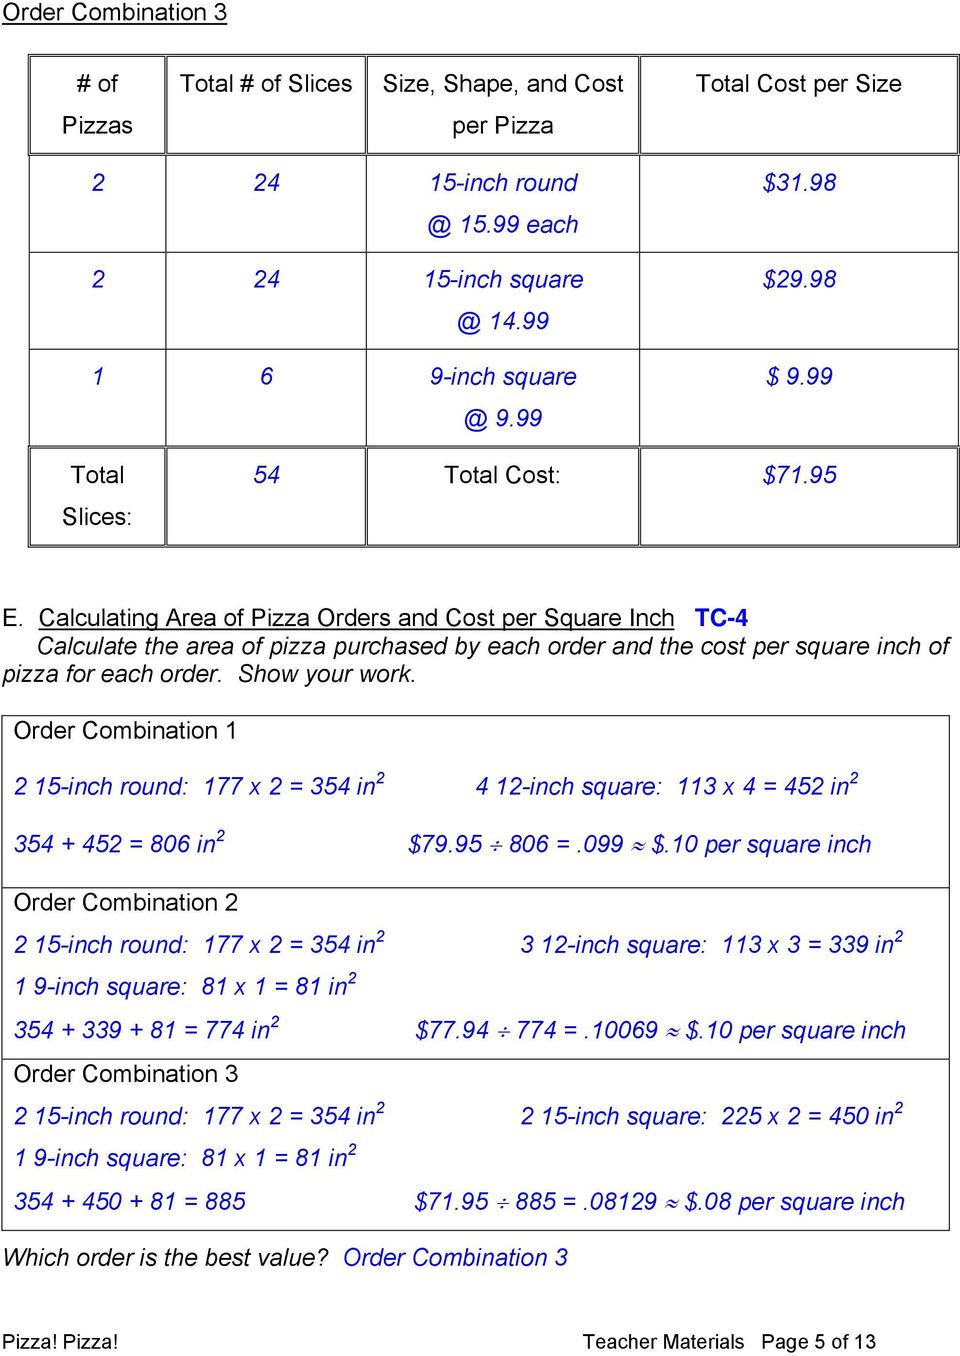 Calculating Area of Pizza Orders and Cost per Square Inch TC-4 Calculate the area of pizza purchased by each order and the cost per square inch of pizza for each order. Show your work.